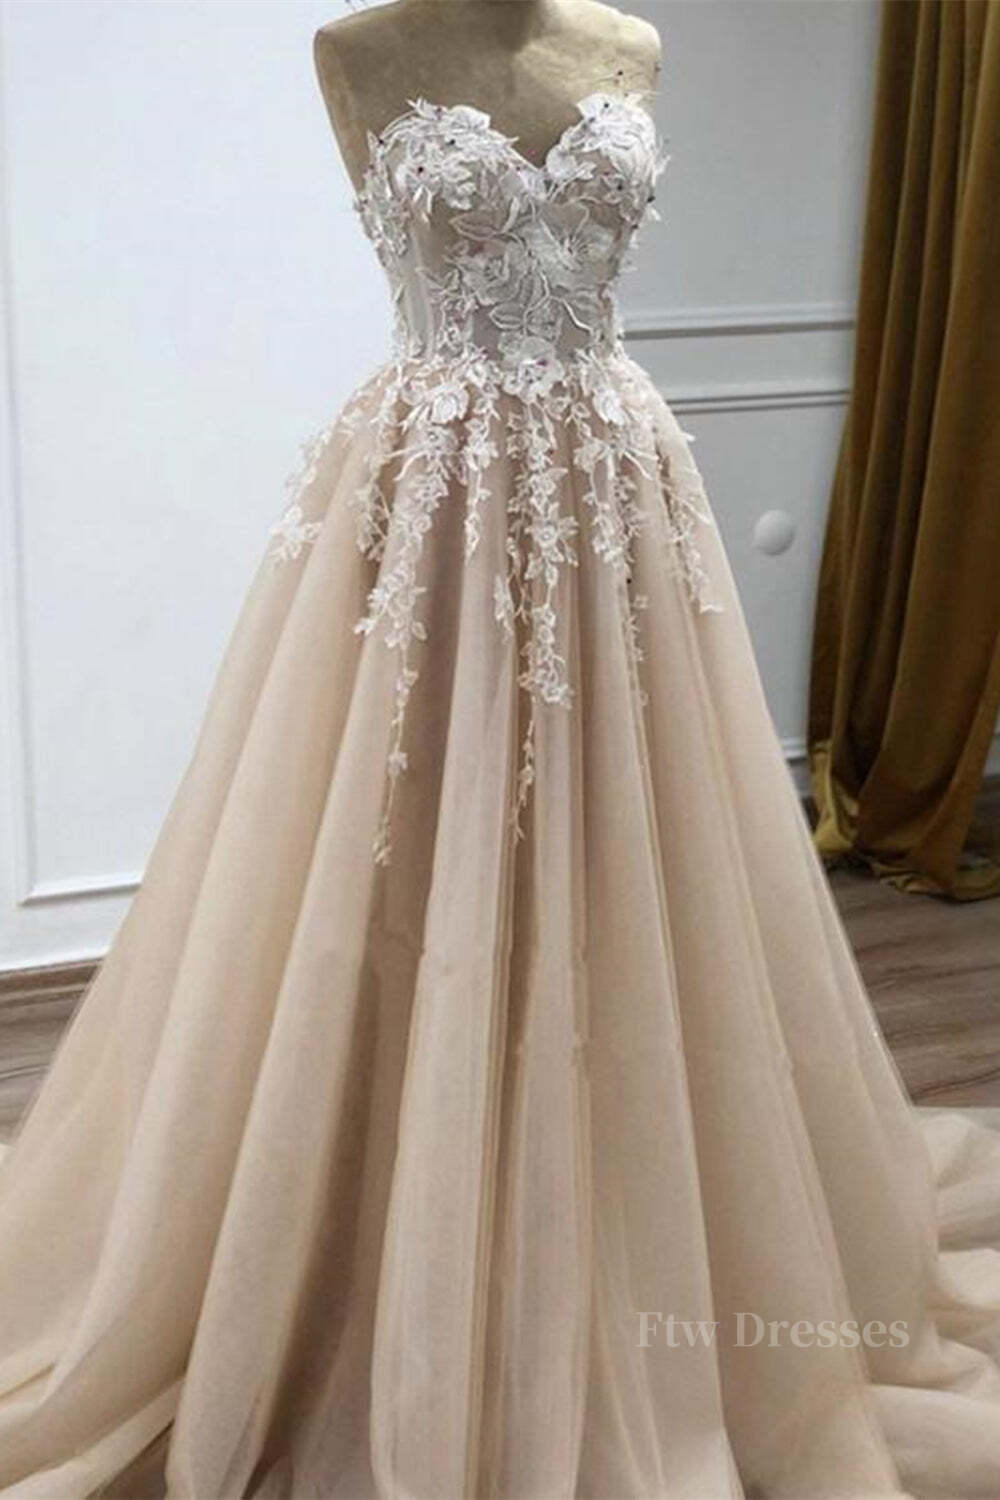 Strapless Sweetheart Neck Champagne Lace Appliques Long Prom Dress, Champagne Lace Floral Formal Evening Dress